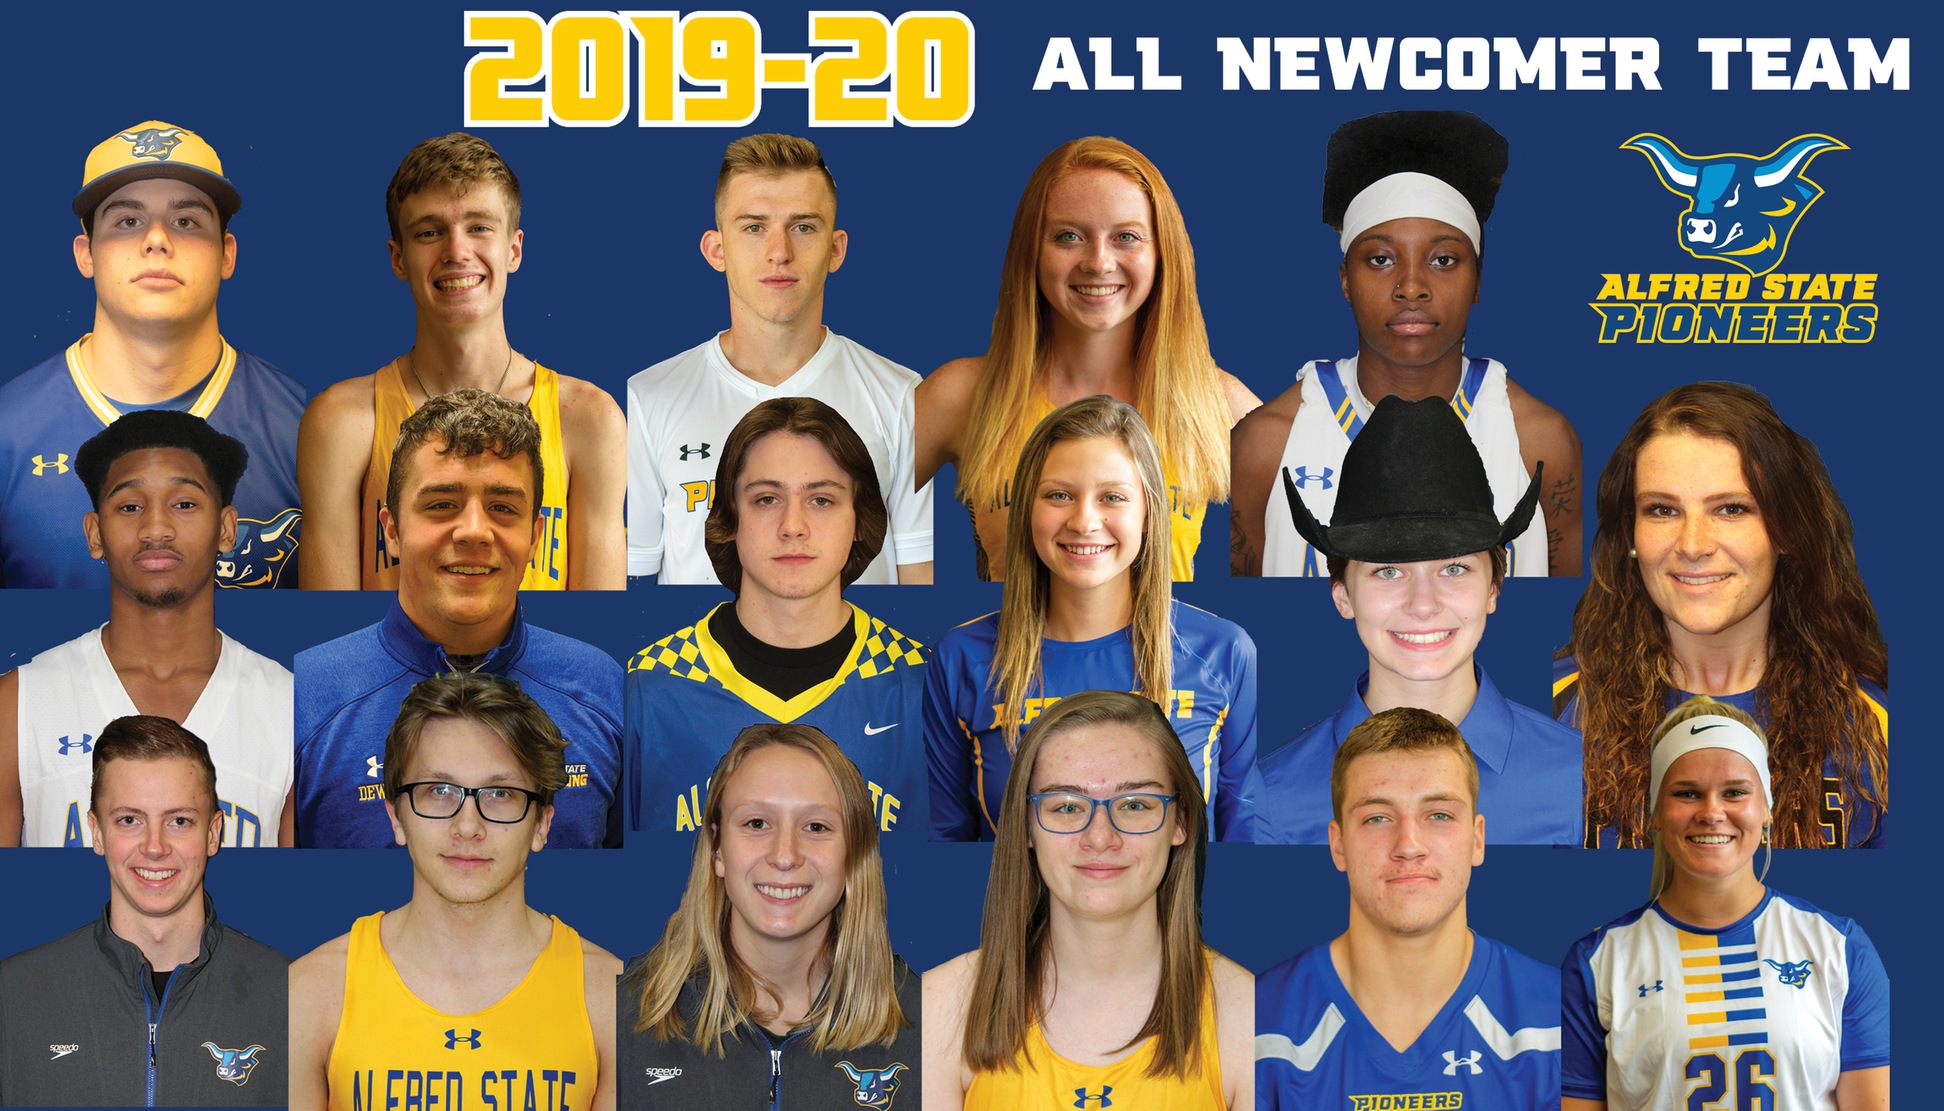 2019-20 Alfred State All Newcomer Team